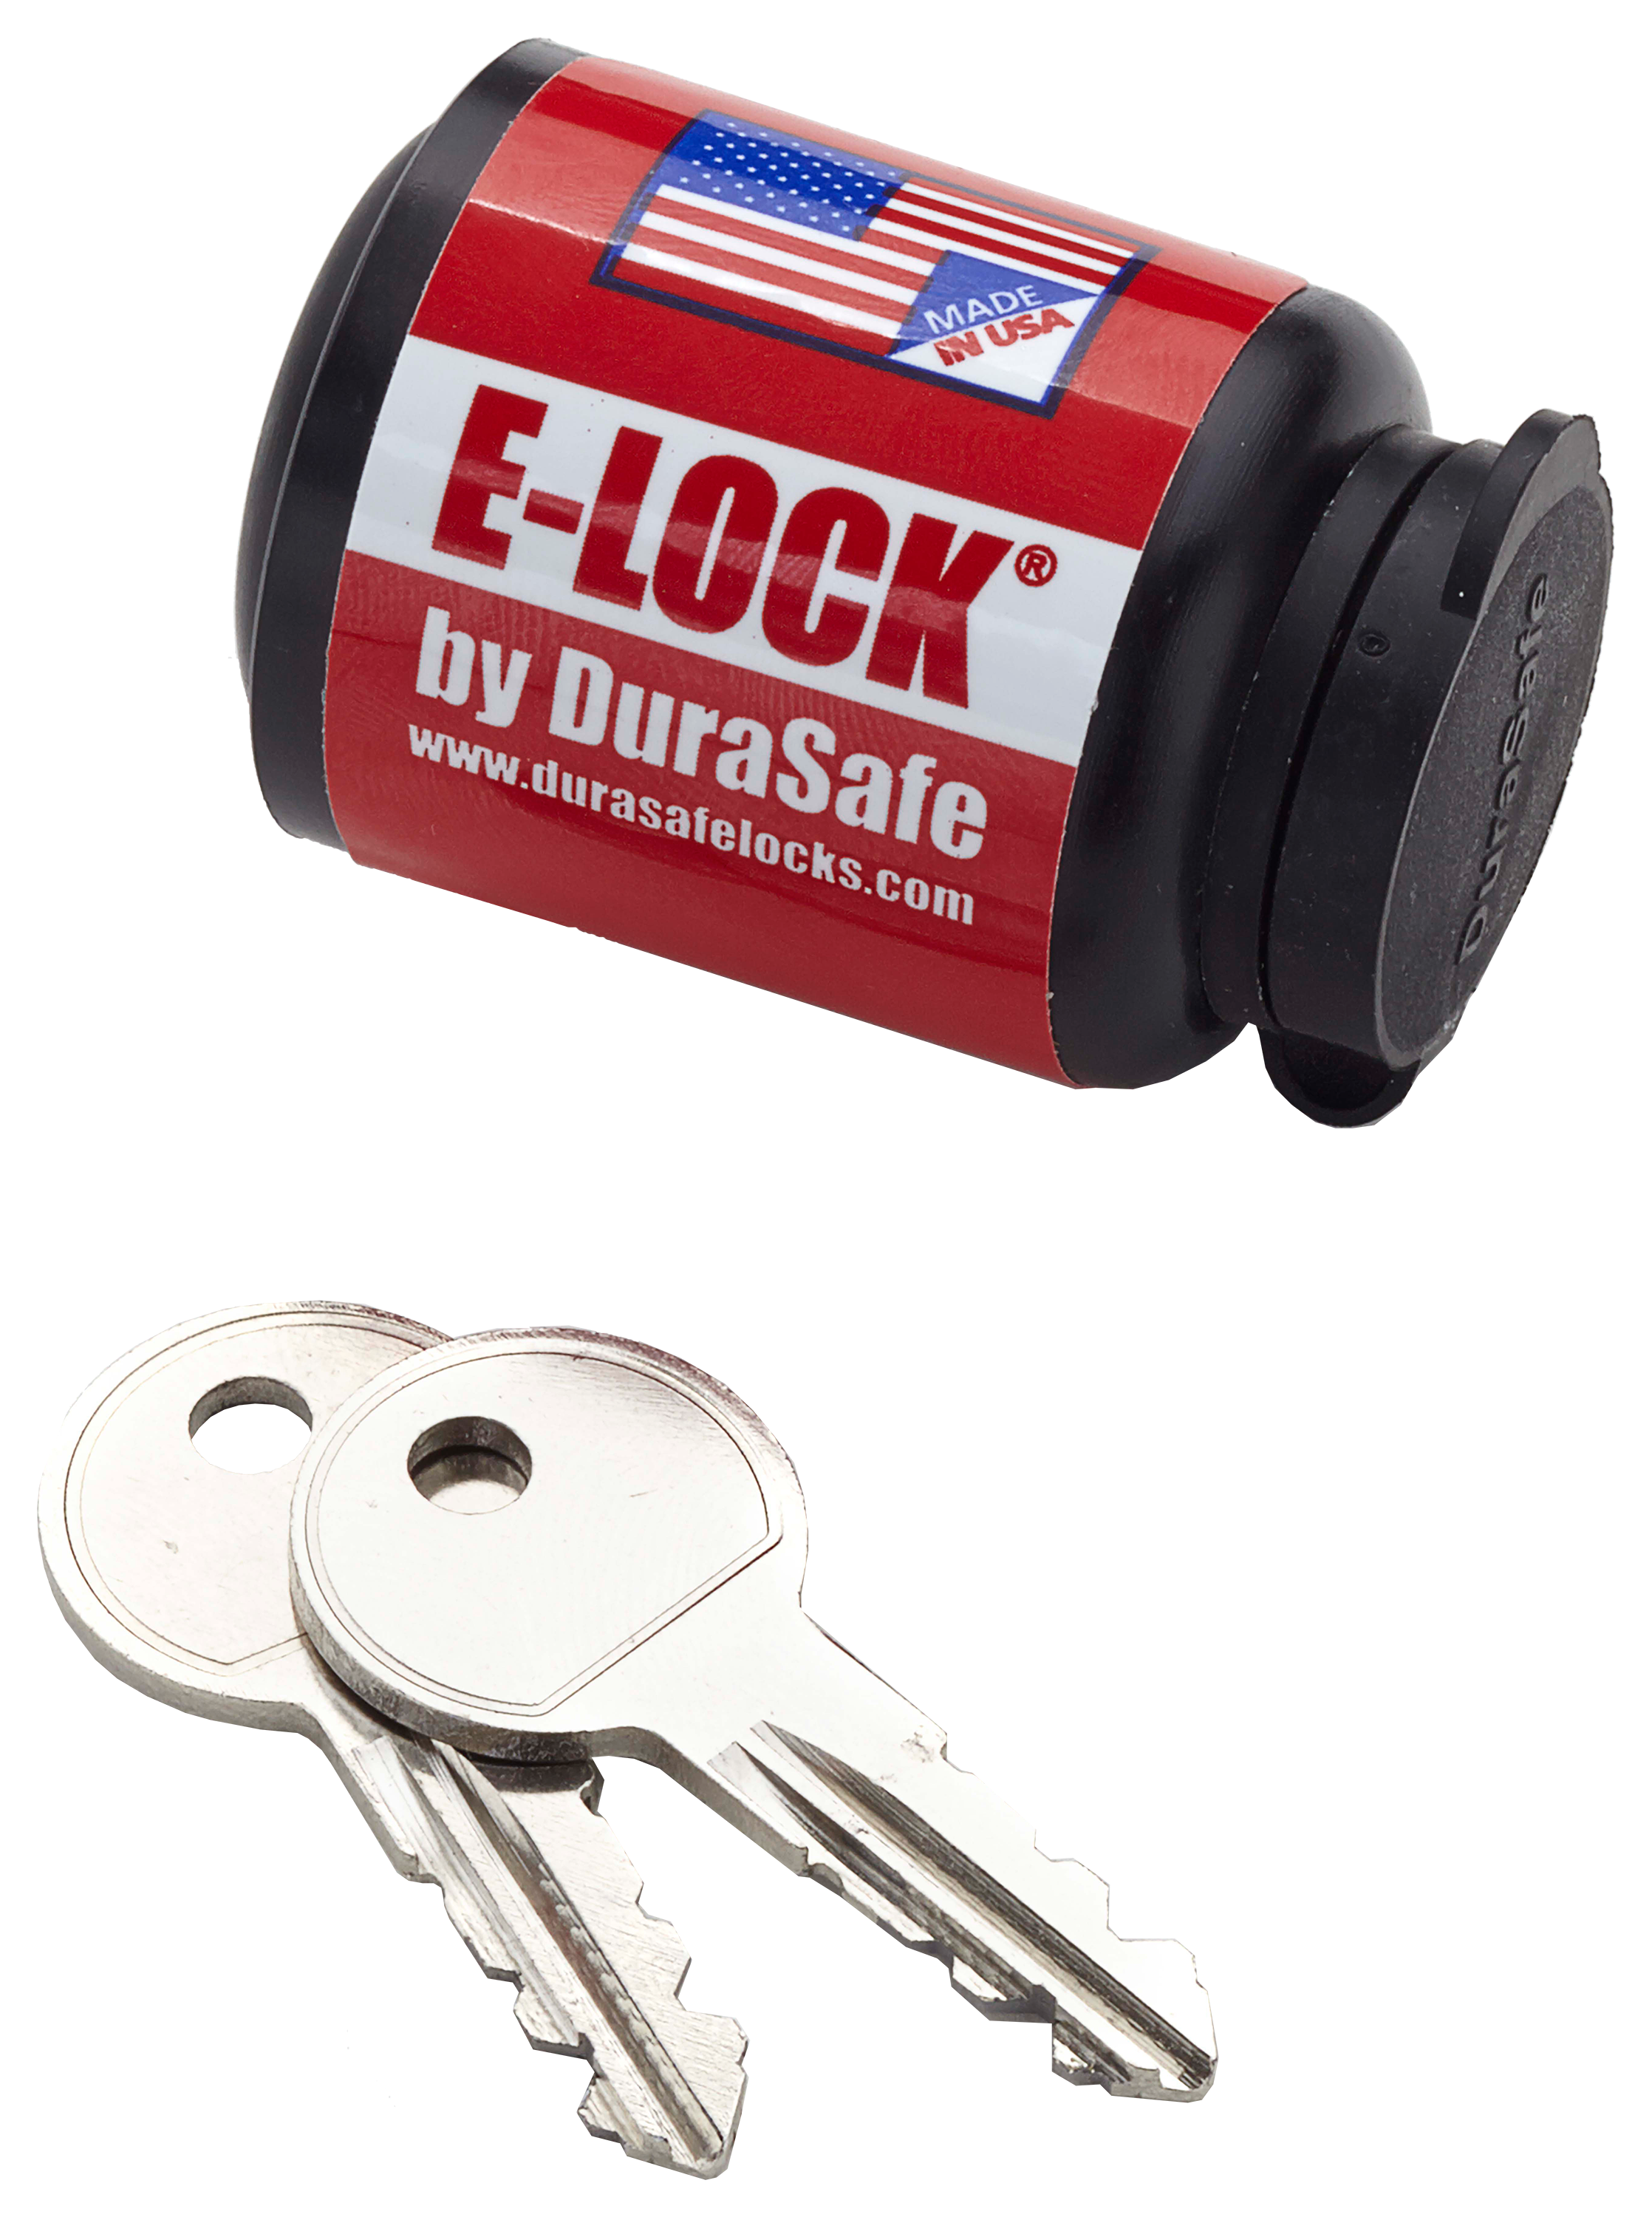 Bass Boat Technologies - Don't forget to secure your electronics with the E- Lock system from DuraSafe Locks. We have them on our website. #durasafe  #elocks #bassboattechnologies #bbt 📸 Brandon Hunter Fishing